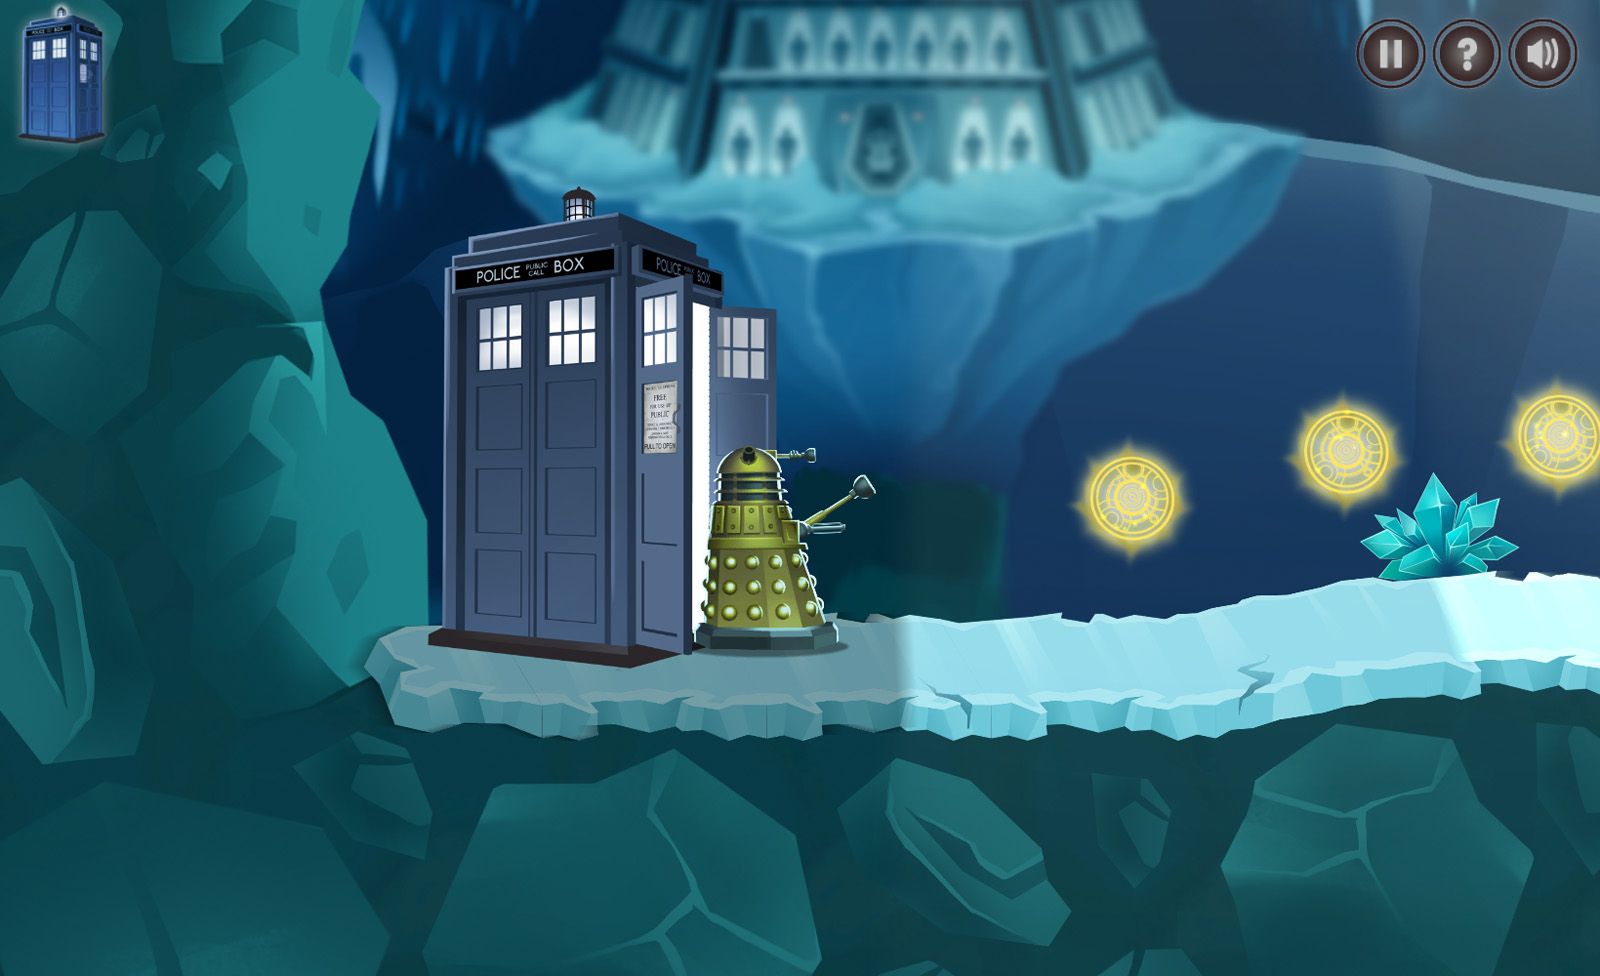 bbc uses free doctor who and the daleks game to help introduce kids to coding image 1